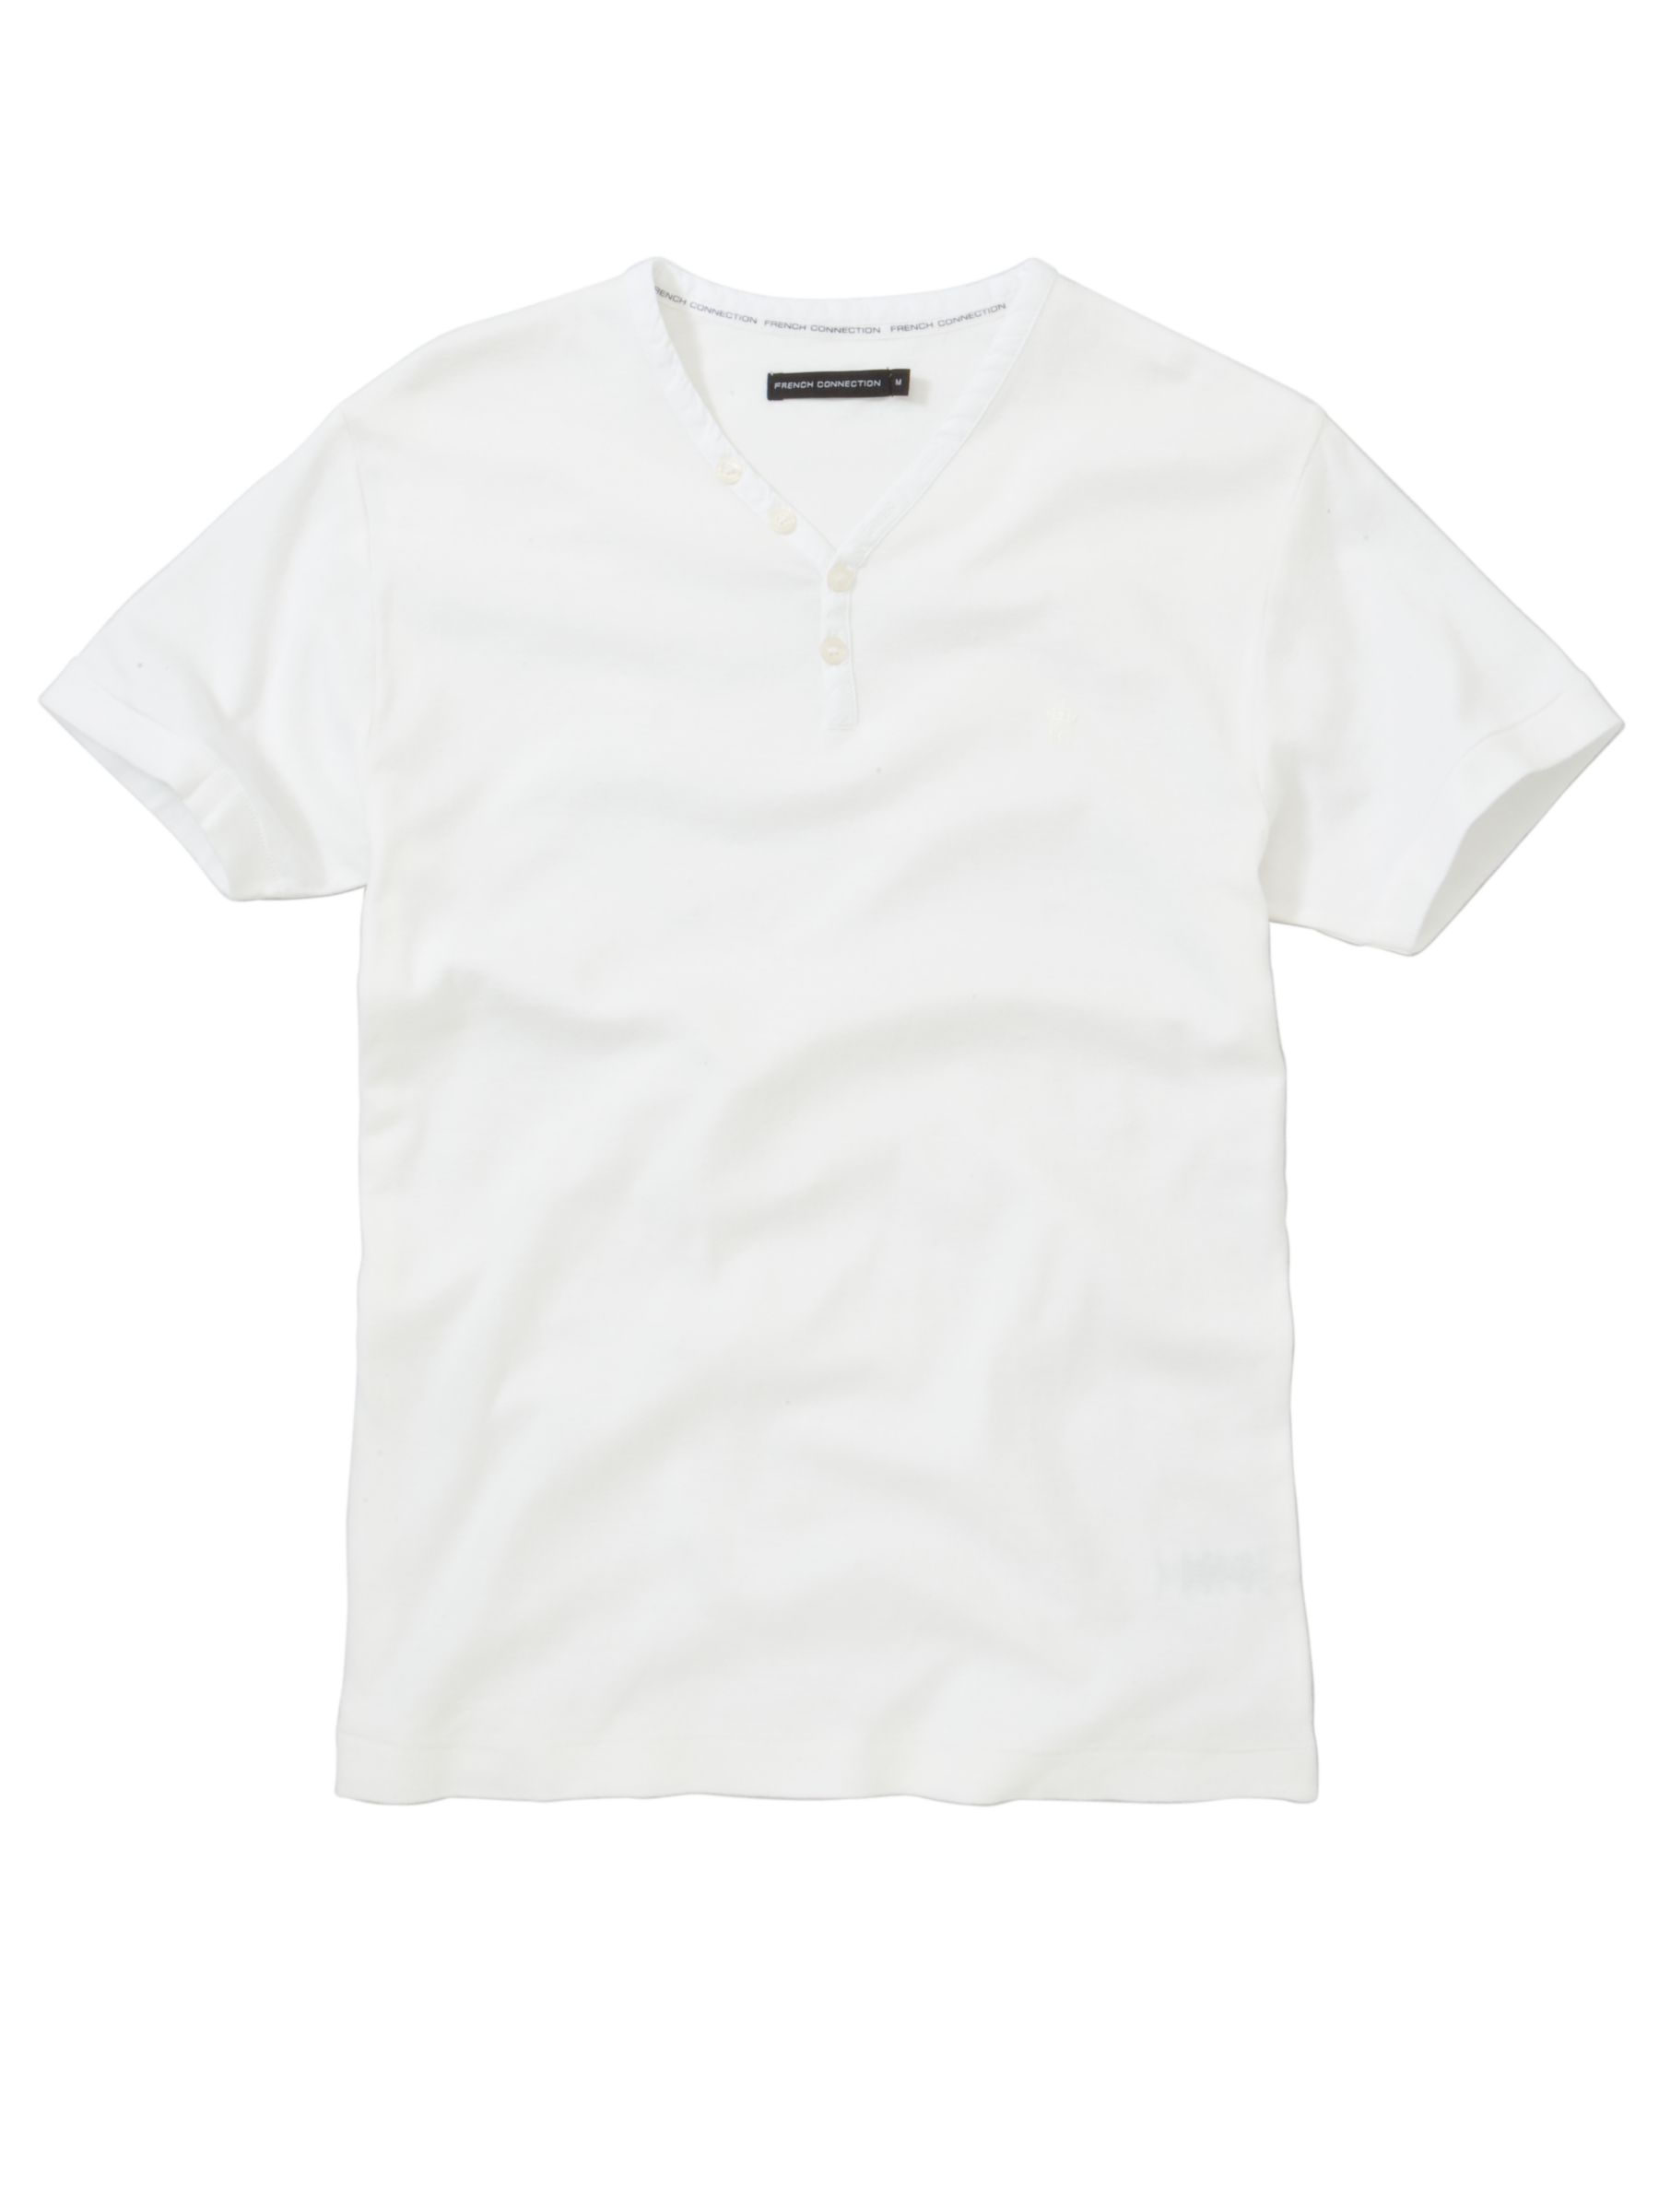 French Connection Grandad T-Shirt, White